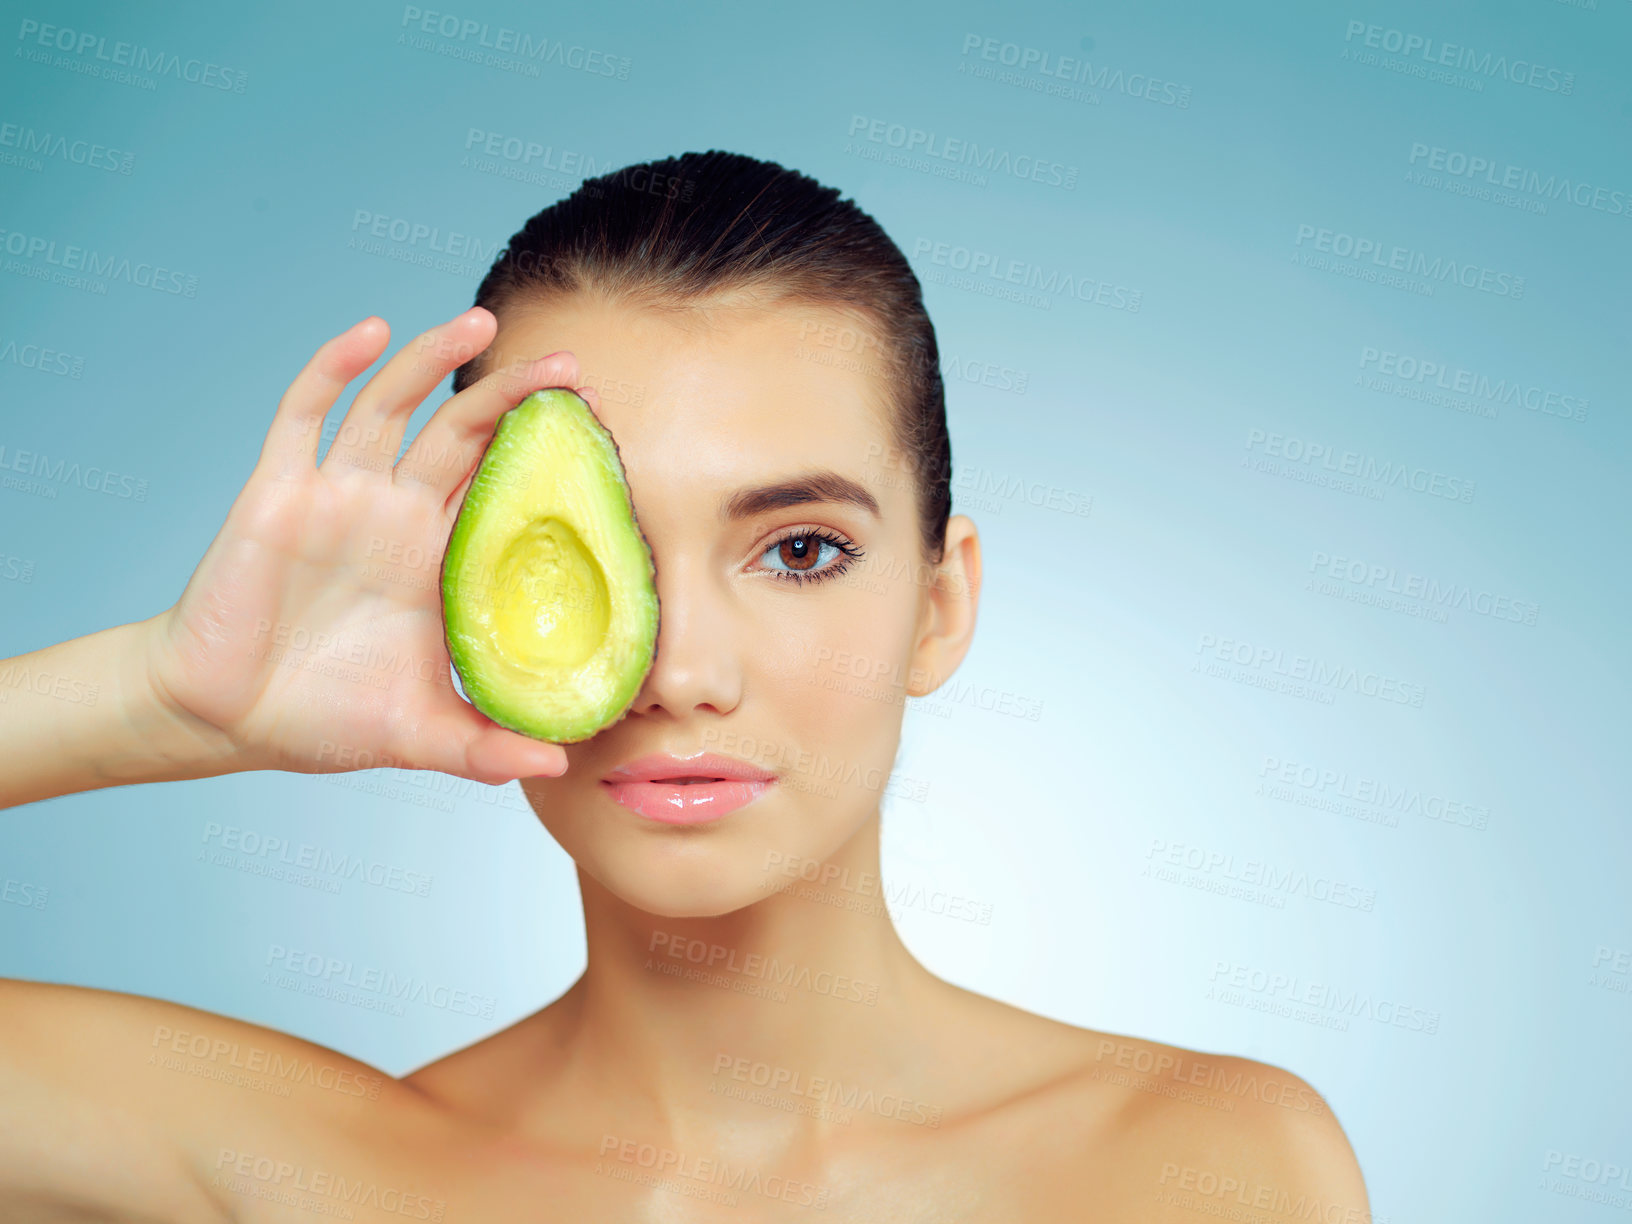 Buy stock photo Studio portrait of a beautiful young woman covering her eye with an avocado against a blue background